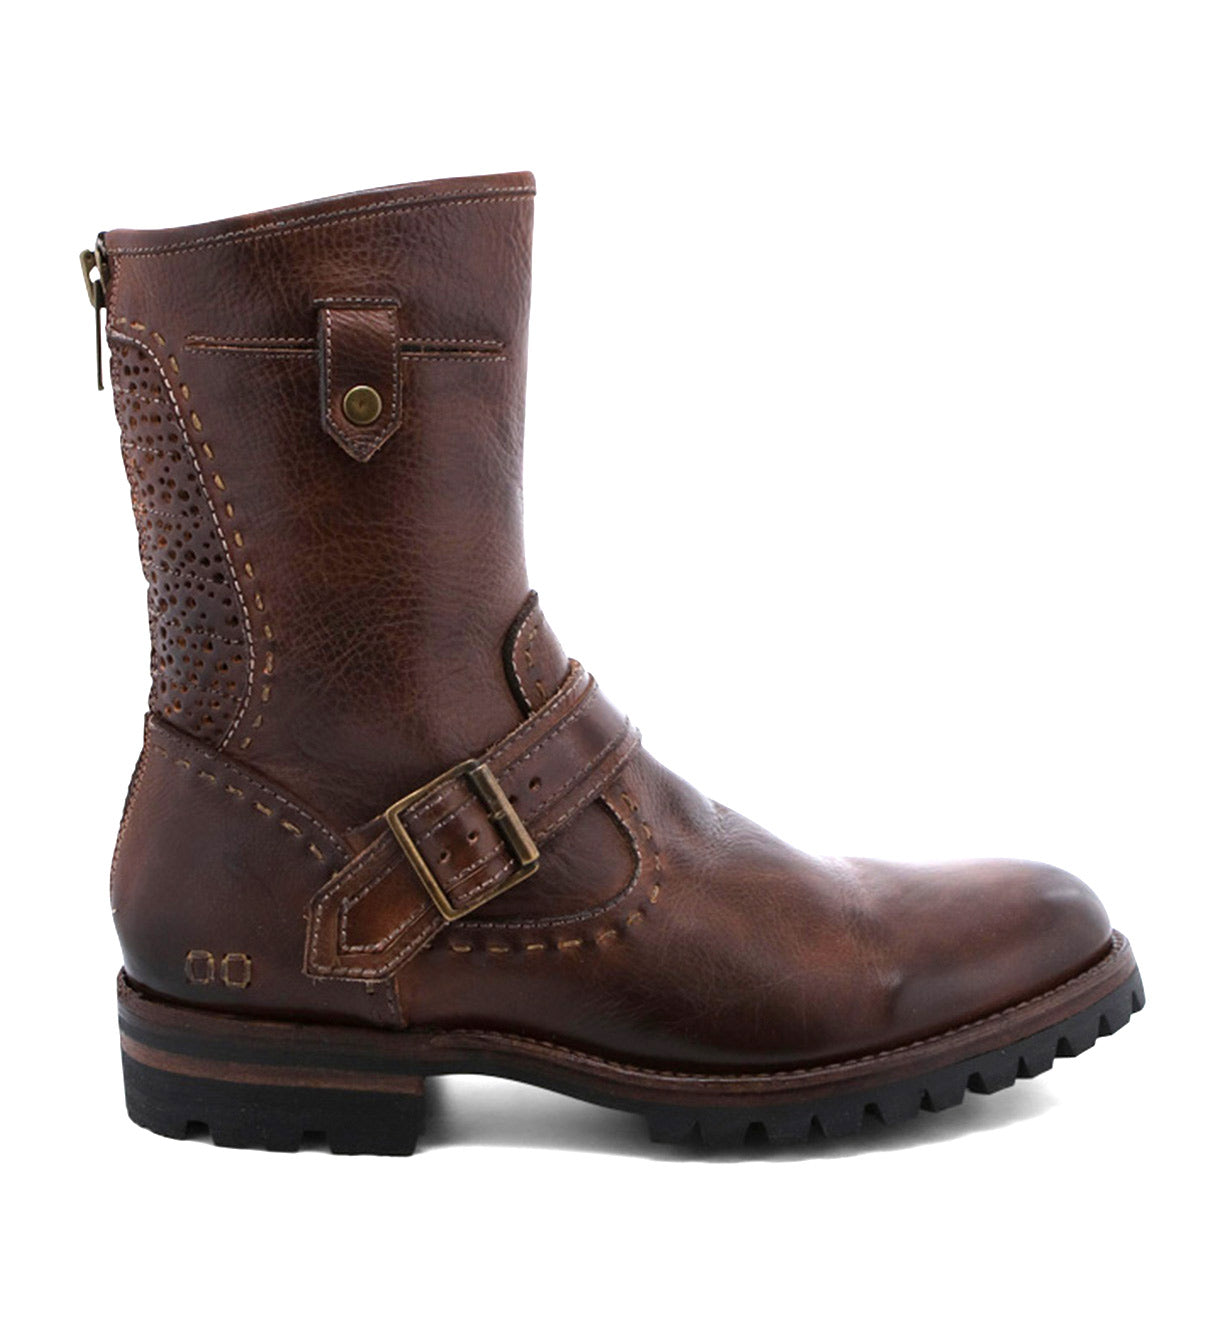 A men's brown leather Brando boot with Bed Stu buckles.